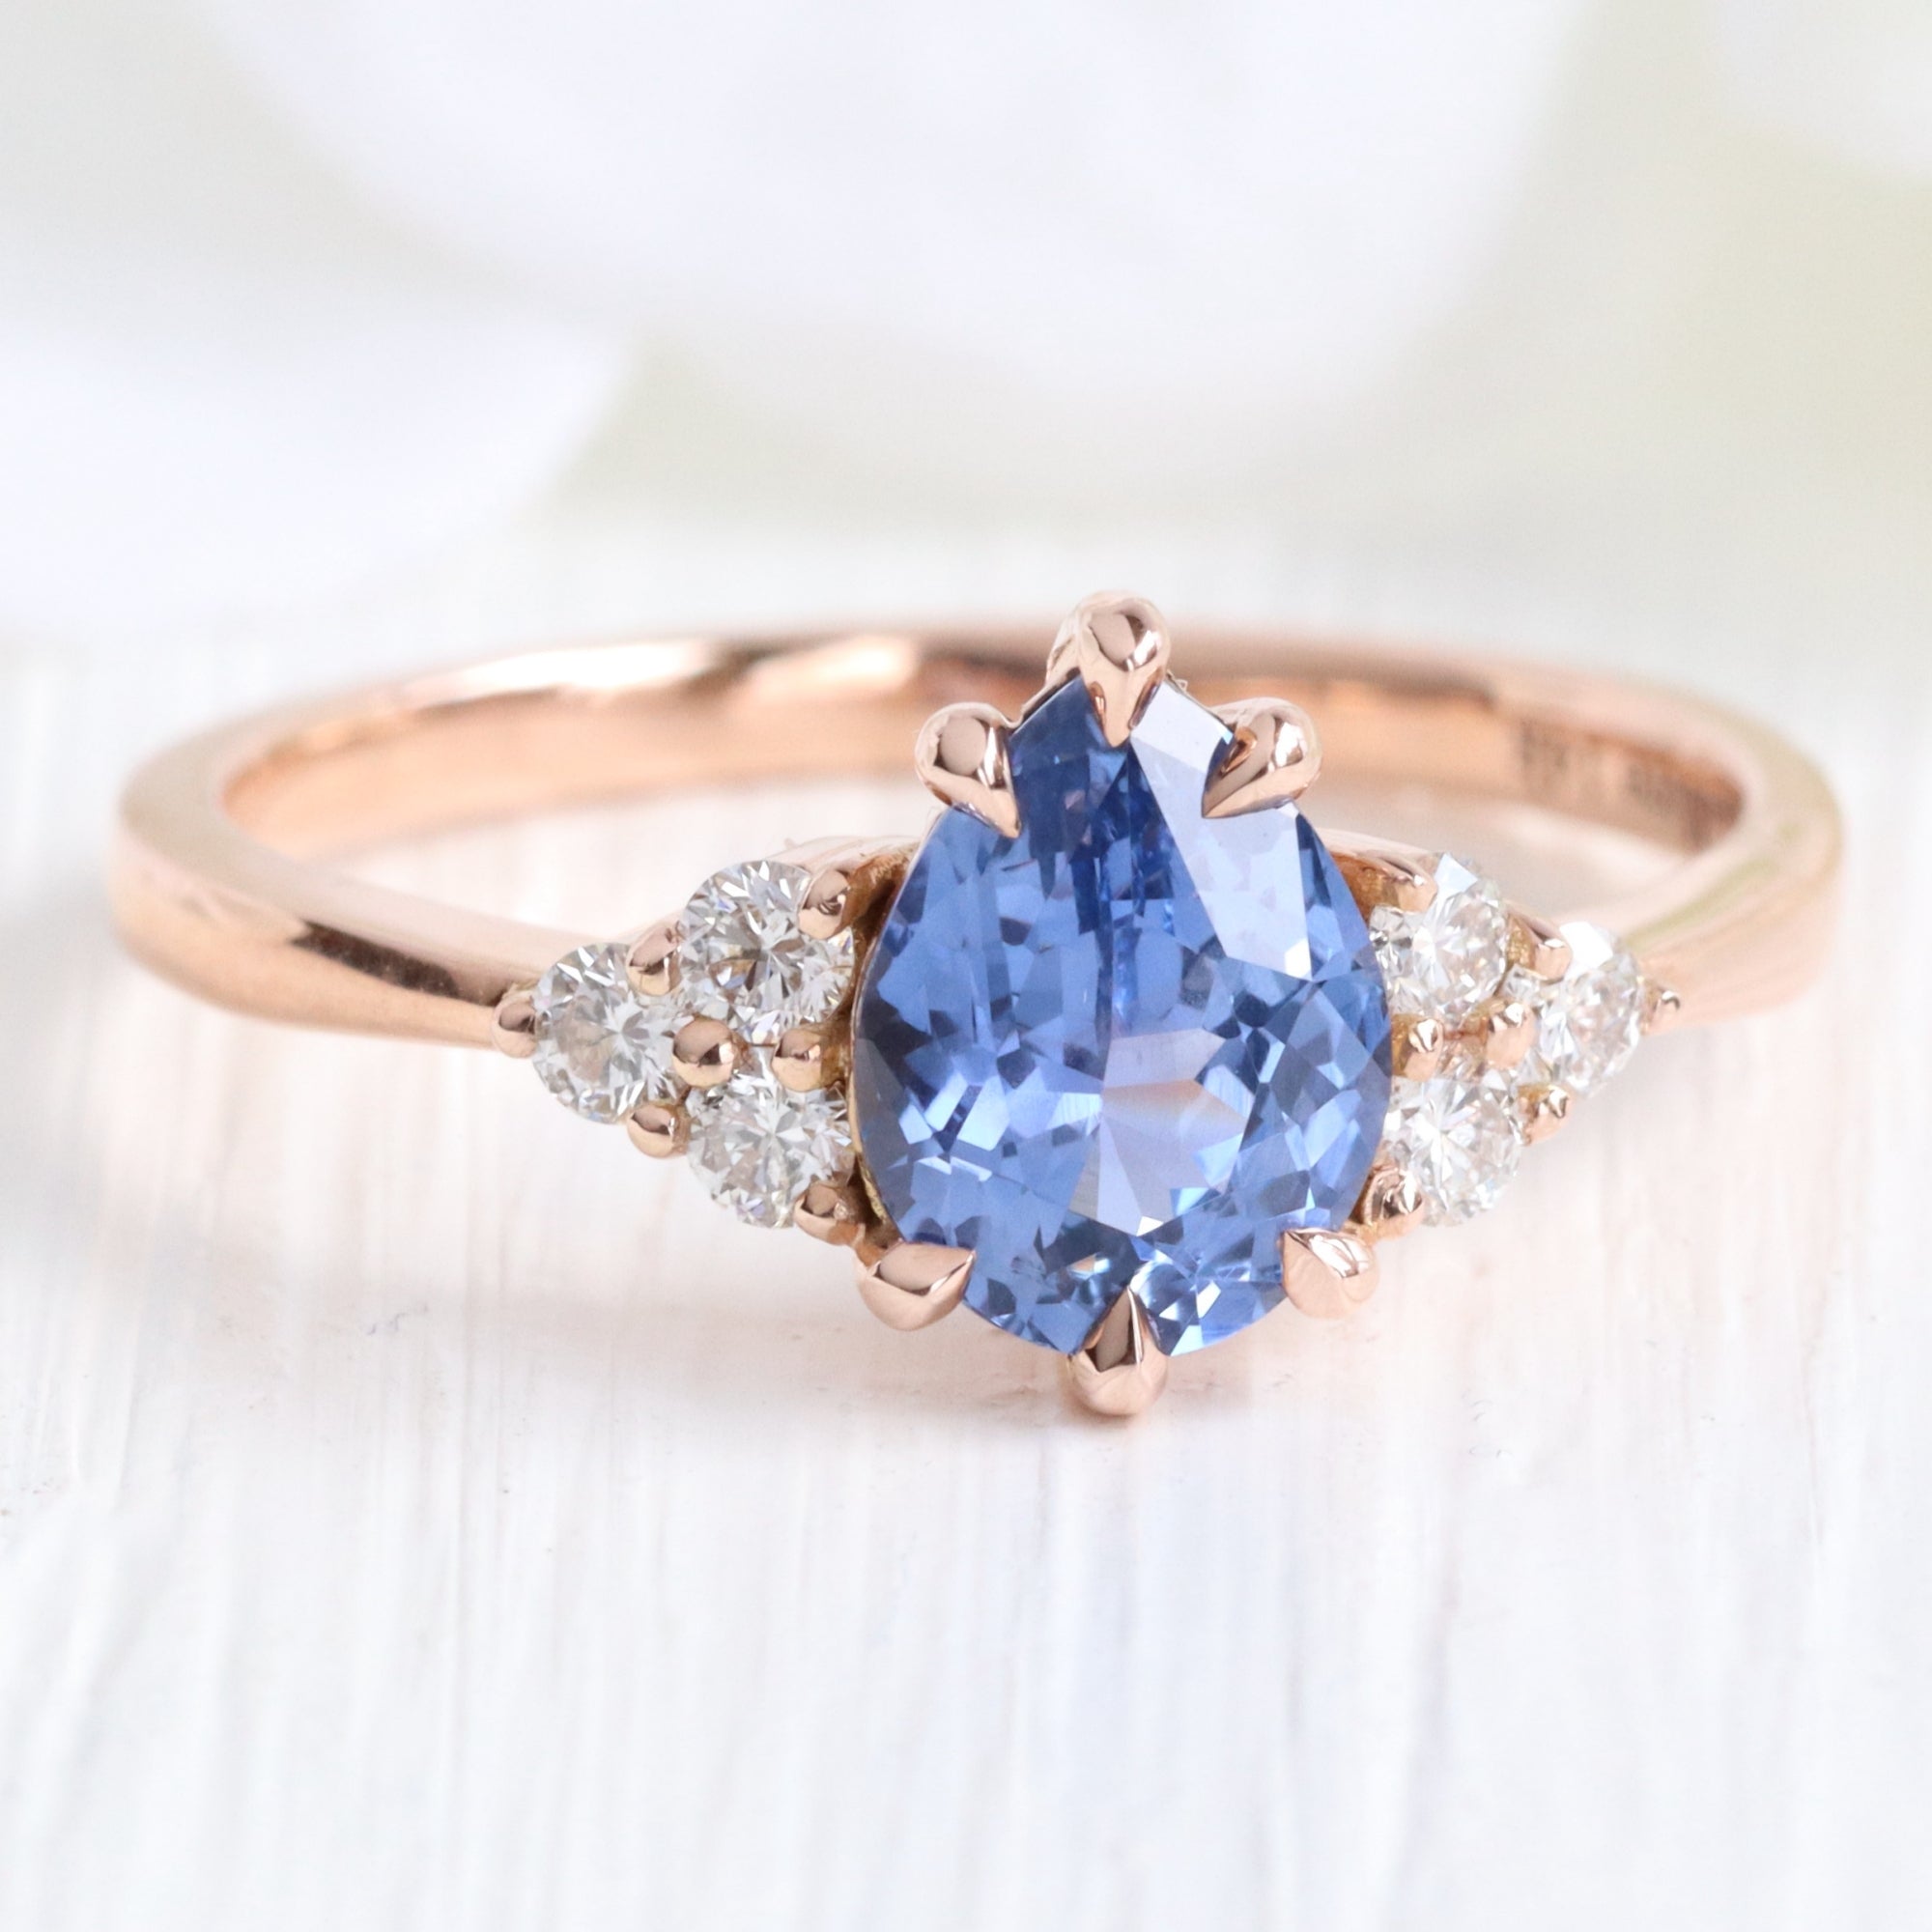 Fashion Bright Ring Round Blue Stone Jewelry Fashion Jewelry Engagement Ring  for Women Wedding Rings (Color : Blue, Size : 8) : Amazon.de: Fashion